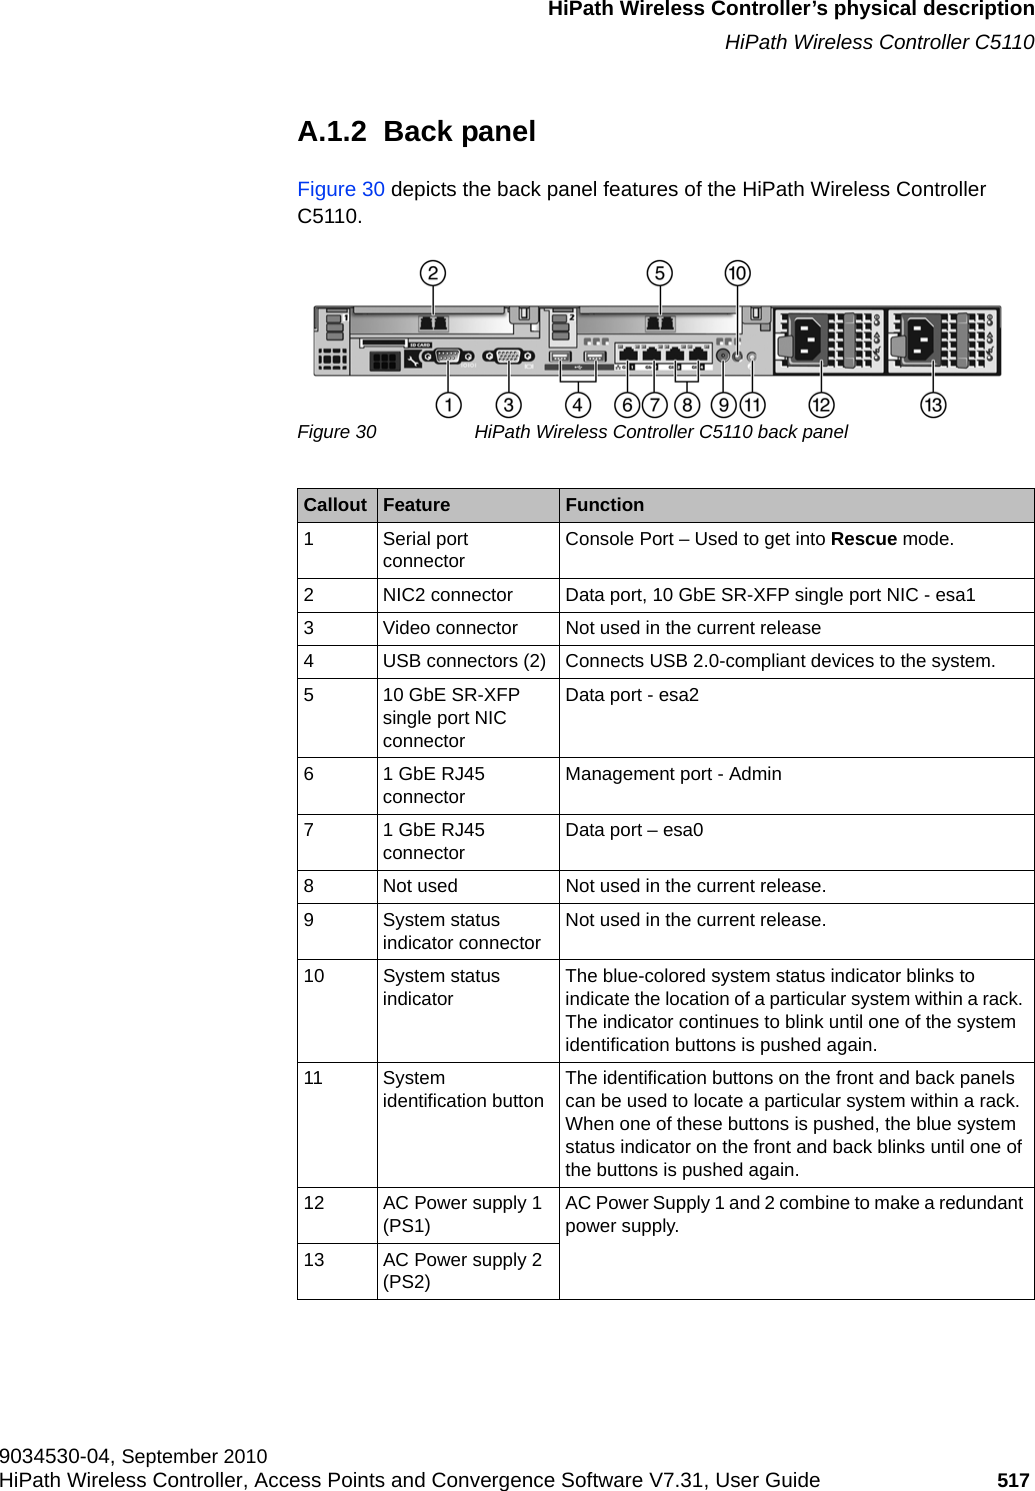 hwc_appendixa.fmHiPath Wireless Controller’s physical descriptionHiPath Wireless Controller C51109034530-04, September 2010HiPath Wireless Controller, Access Points and Convergence Software V7.31, User Guide 517         A.1.2  Back panelFigure 30 depicts the back panel features of the HiPath Wireless Controller C5110.Figure 30 HiPath Wireless Controller C5110 back panel Callout  Feature Function 1 Serial port connector Console Port – Used to get into Rescue mode.2 NIC2 connector Data port, 10 GbE SR-XFP single port NIC - esa13 Video connector  Not used in the current release4 USB connectors (2) Connects USB 2.0-compliant devices to the system. 5 10 GbE SR-XFP single port NIC connectorData port - esa26 1 GbE RJ45 connector  Management port - Admin7 1 GbE RJ45 connector Data port – esa08 Not used Not used in the current release.9 System status indicator connector Not used in the current release.10 System status indicator The blue-colored system status indicator blinks to indicate the location of a particular system within a rack. The indicator continues to blink until one of the system identification buttons is pushed again.11 System identification button The identification buttons on the front and back panels can be used to locate a particular system within a rack. When one of these buttons is pushed, the blue system status indicator on the front and back blinks until one of the buttons is pushed again.12 AC Power supply 1 (PS1) AC Power Supply 1 and 2 combine to make a redundant power supply.13 AC Power supply 2 (PS2)